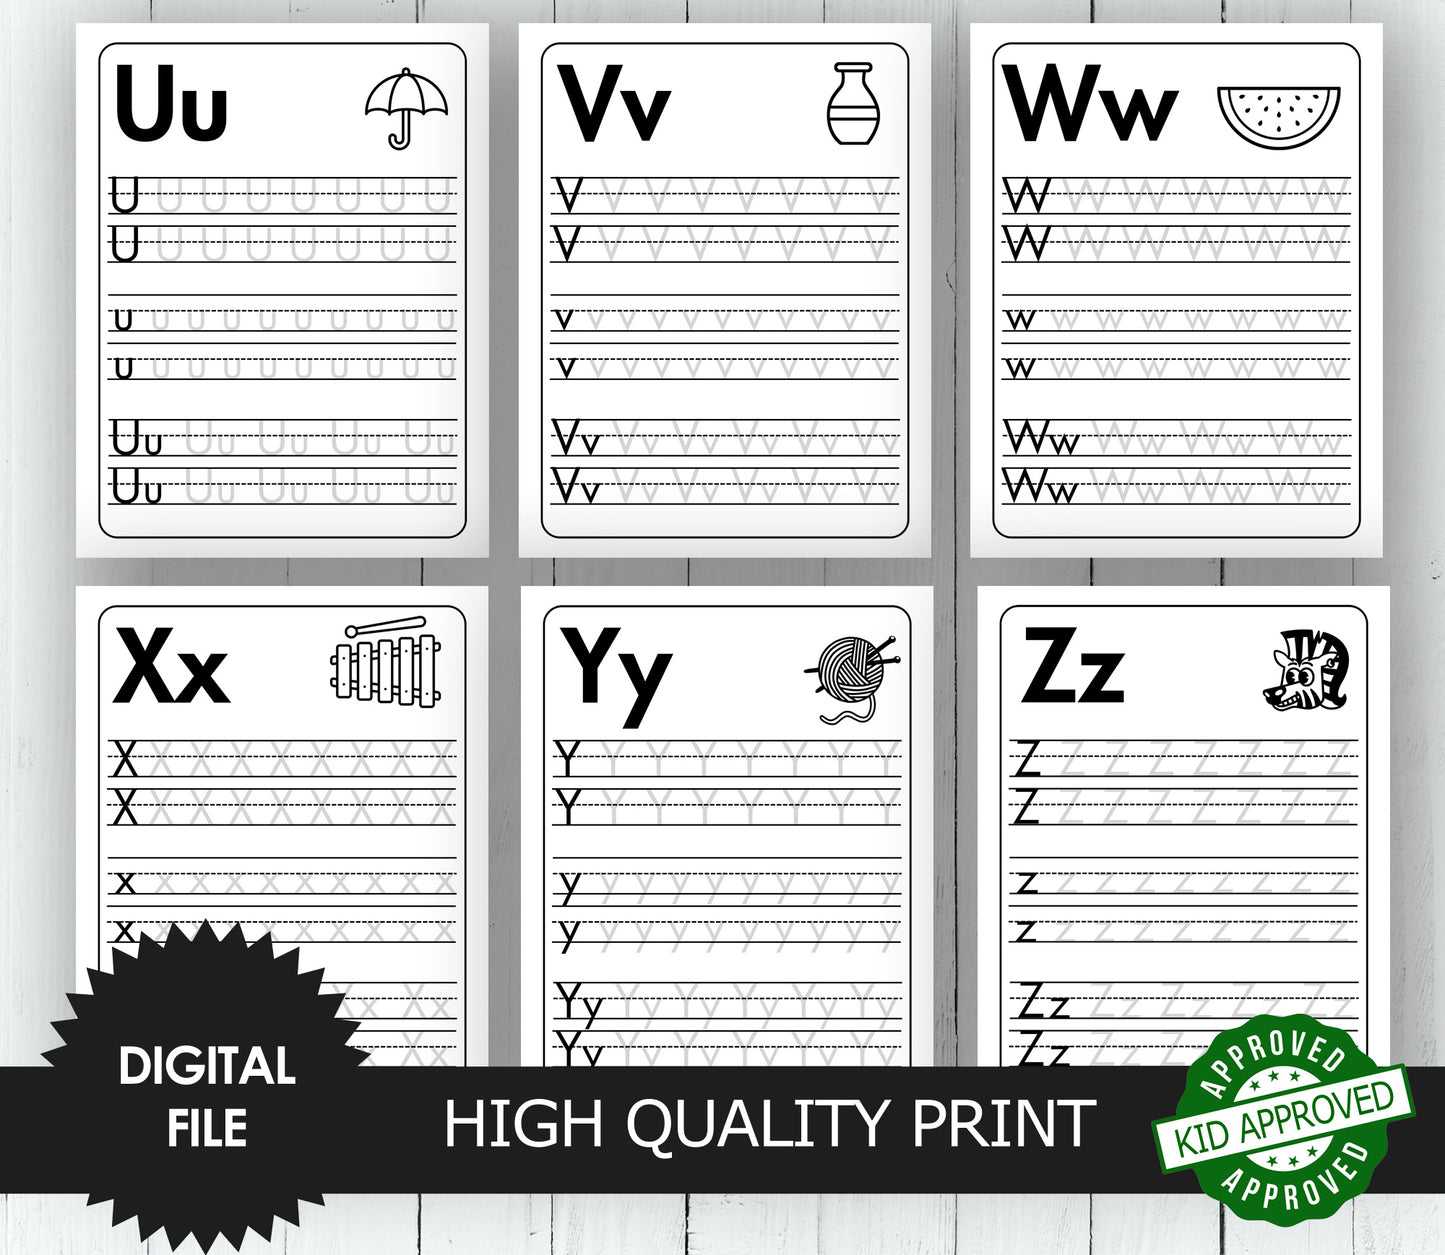 Alphabet Letter Tracing A-Z, Uppercase and Lowercase, Kindergarten and Preschool Worksheets preview U-Z